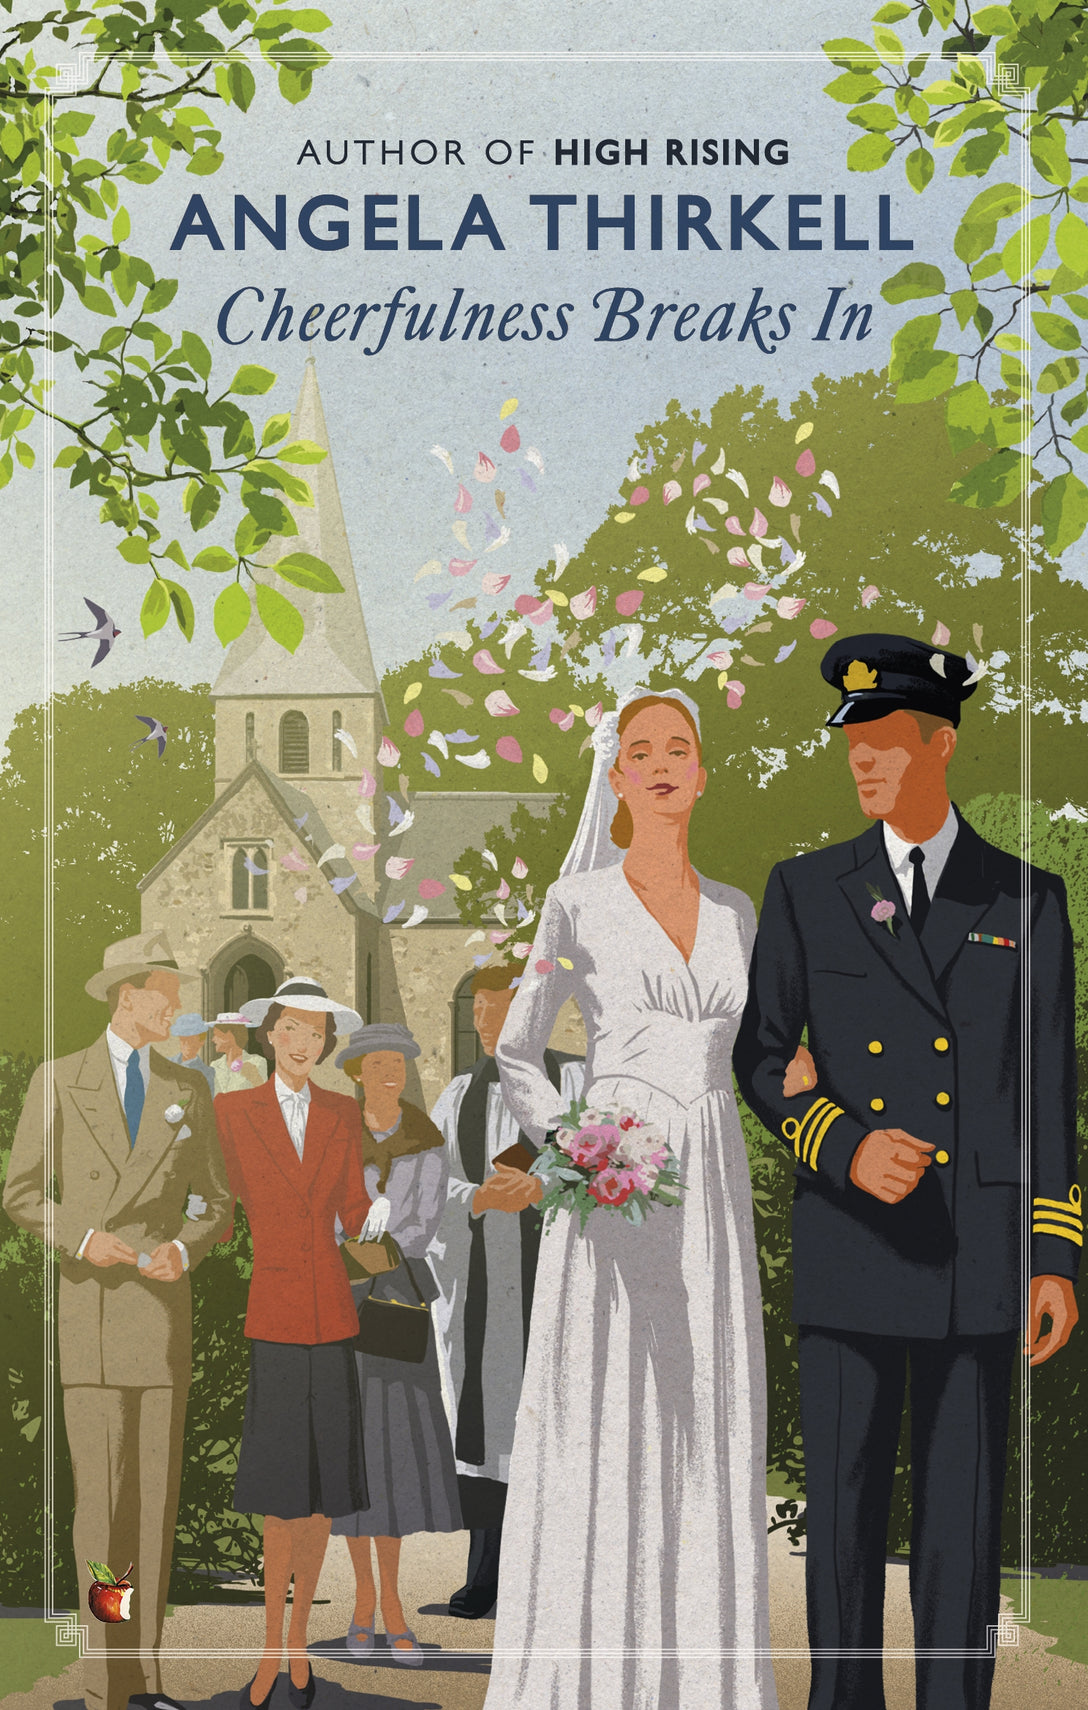 Cheerfulness Breaks In by Angela Thirkell